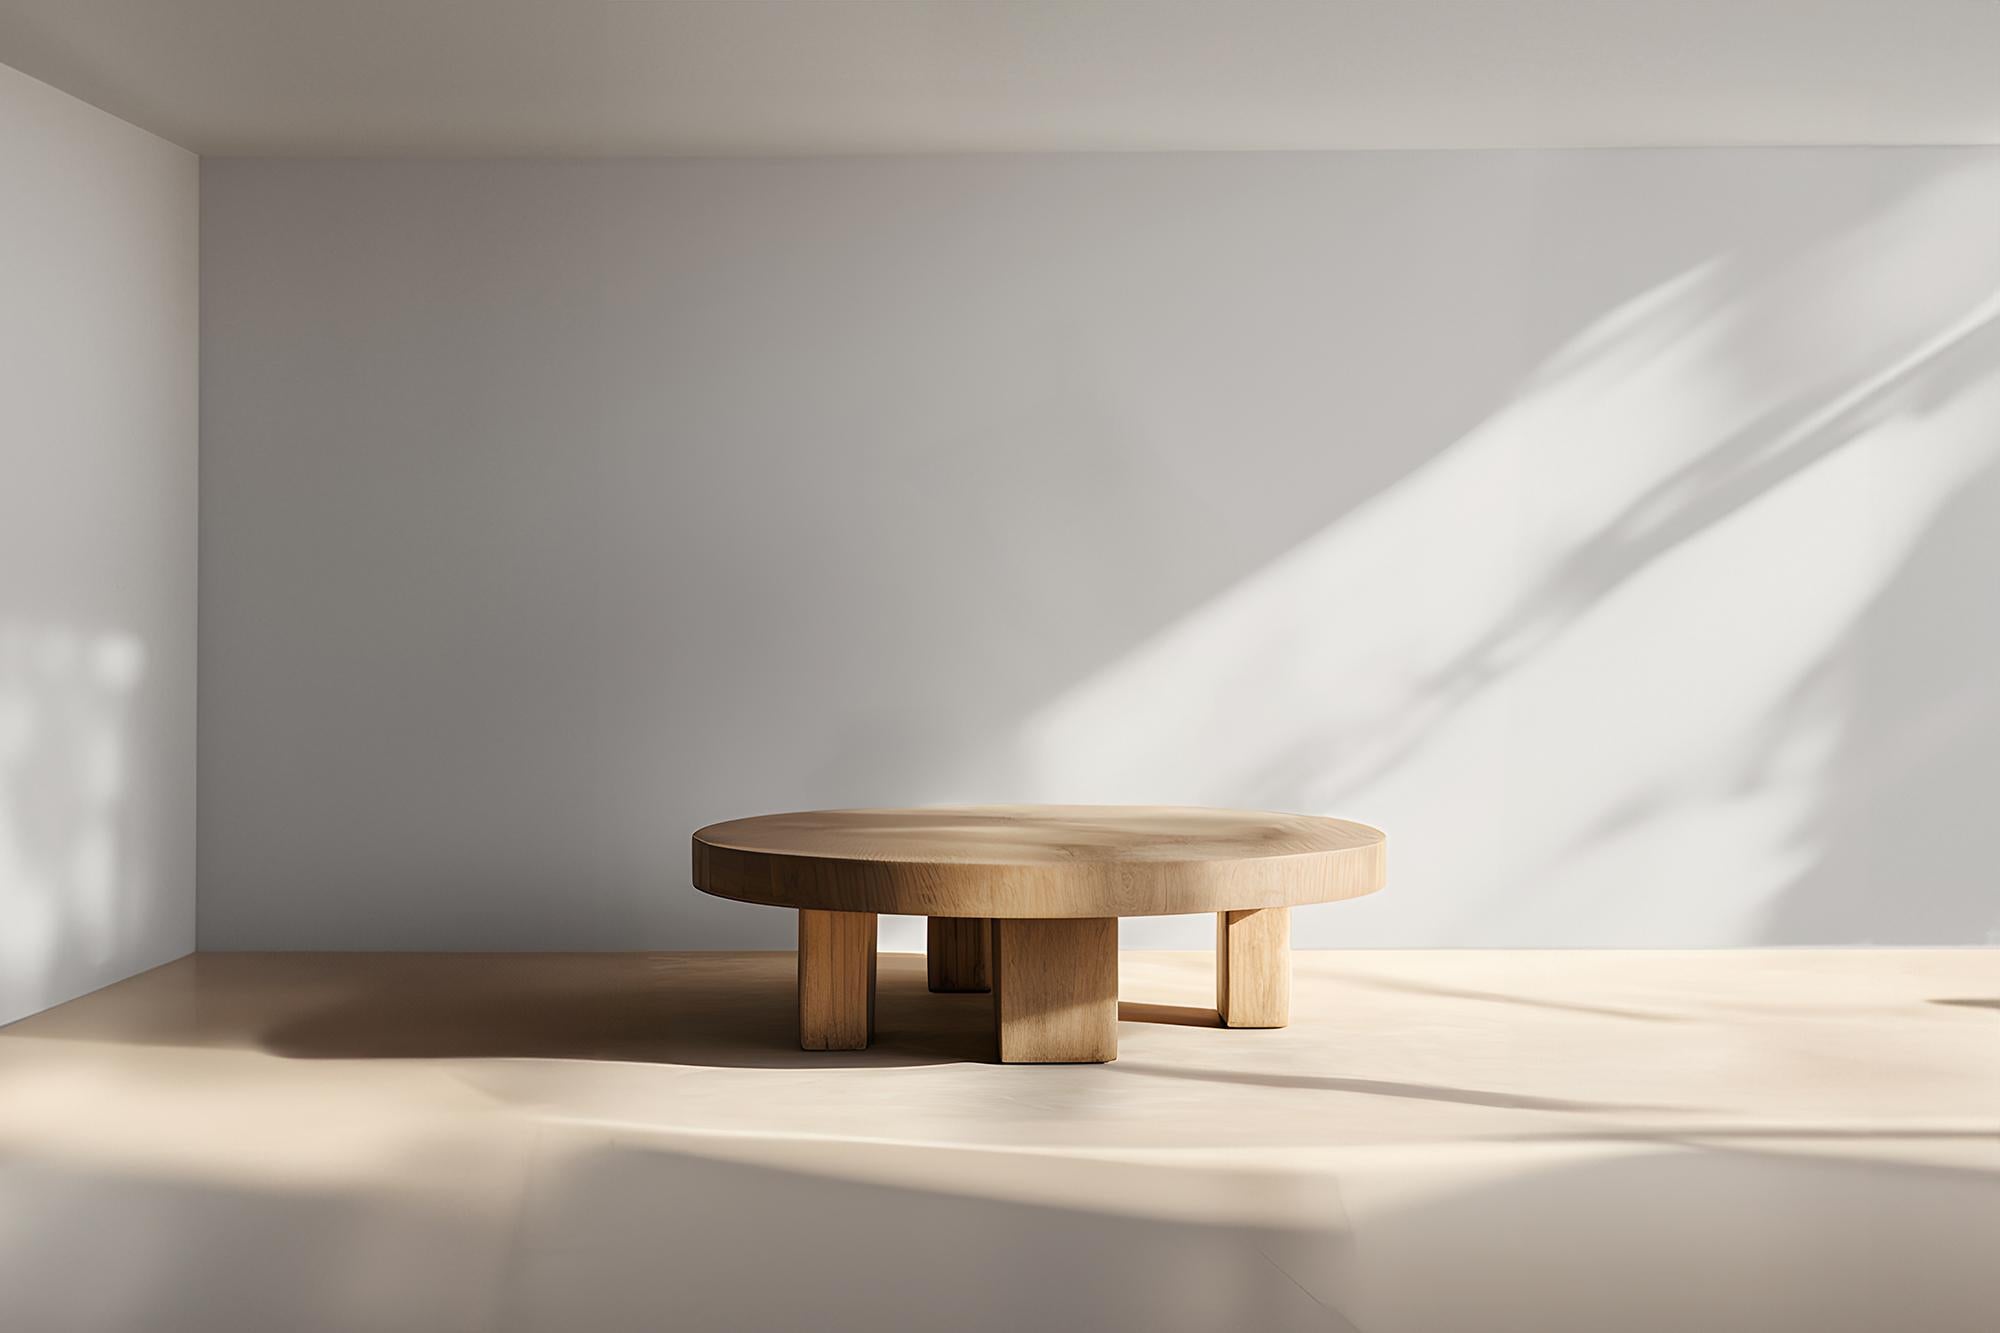 Round Solid Wood Fundamenta 50 Abstract Elegance, Durable Design by NONO


Sculptural coffee table made of solid wood with a natural water-based or black tinted finish. Due to the nature of the production process, each piece may vary in grain,